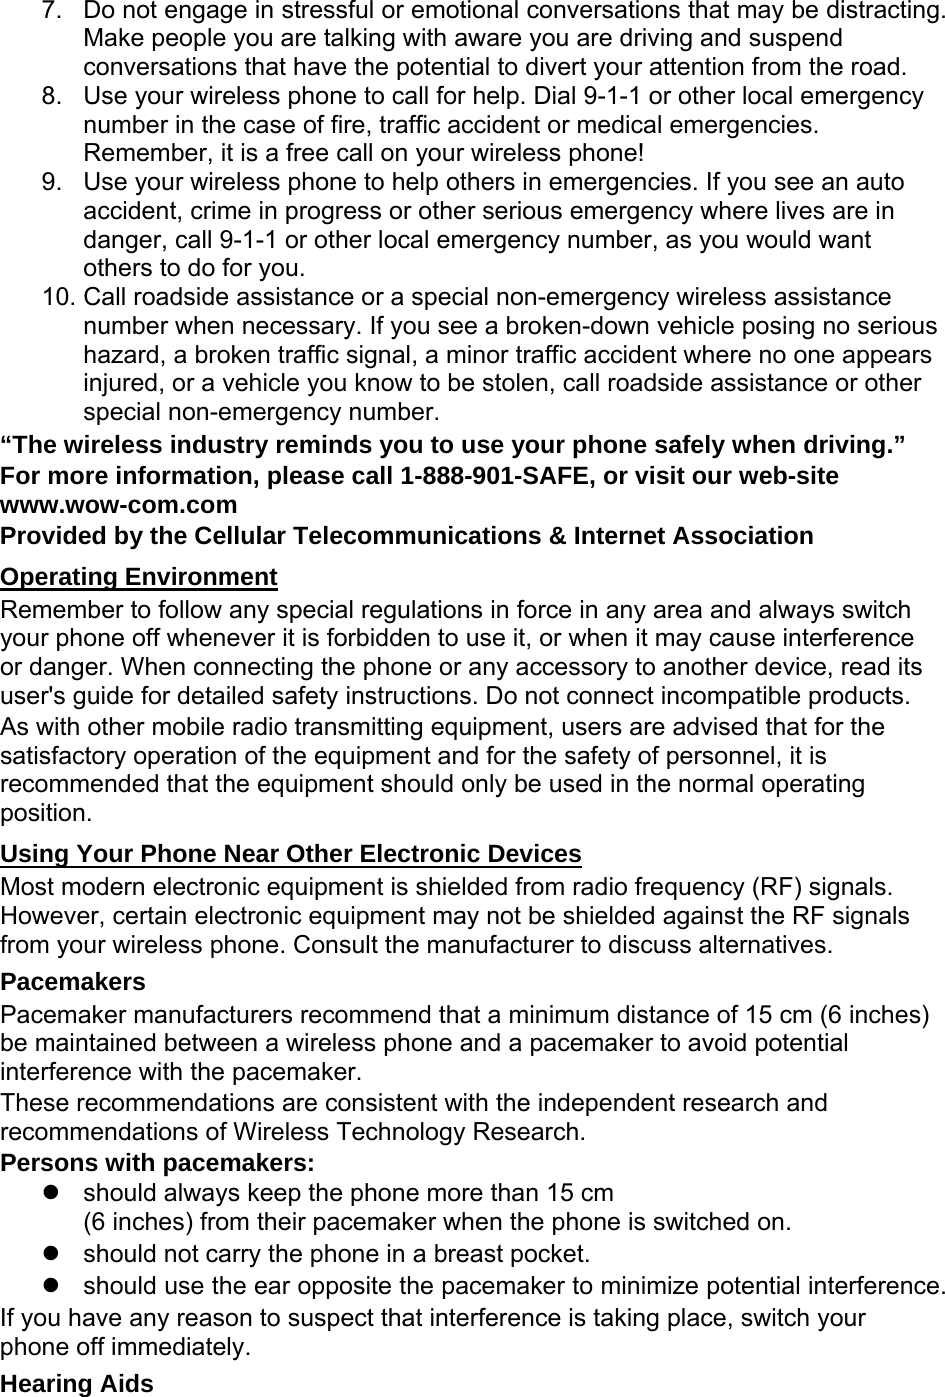 7.  Do not engage in stressful or emotional conversations that may be distracting. Make people you are talking with aware you are driving and suspend conversations that have the potential to divert your attention from the road. 8.  Use your wireless phone to call for help. Dial 9-1-1 or other local emergency number in the case of fire, traffic accident or medical emergencies. Remember, it is a free call on your wireless phone! 9.  Use your wireless phone to help others in emergencies. If you see an auto accident, crime in progress or other serious emergency where lives are in danger, call 9-1-1 or other local emergency number, as you would want others to do for you. 10. Call roadside assistance or a special non-emergency wireless assistance number when necessary. If you see a broken-down vehicle posing no serious hazard, a broken traffic signal, a minor traffic accident where no one appears injured, or a vehicle you know to be stolen, call roadside assistance or other special non-emergency number. “The wireless industry reminds you to use your phone safely when driving.” For more information, please call 1-888-901-SAFE, or visit our web-site www.wow-com.com Provided by the Cellular Telecommunications &amp; Internet Association Operating Environment Remember to follow any special regulations in force in any area and always switch your phone off whenever it is forbidden to use it, or when it may cause interference or danger. When connecting the phone or any accessory to another device, read its user&apos;s guide for detailed safety instructions. Do not connect incompatible products. As with other mobile radio transmitting equipment, users are advised that for the satisfactory operation of the equipment and for the safety of personnel, it is recommended that the equipment should only be used in the normal operating position. Using Your Phone Near Other Electronic Devices Most modern electronic equipment is shielded from radio frequency (RF) signals. However, certain electronic equipment may not be shielded against the RF signals from your wireless phone. Consult the manufacturer to discuss alternatives. Pacemakers Pacemaker manufacturers recommend that a minimum distance of 15 cm (6 inches) be maintained between a wireless phone and a pacemaker to avoid potential interference with the pacemaker. These recommendations are consistent with the independent research and recommendations of Wireless Technology Research. Persons with pacemakers:   should always keep the phone more than 15 cm   (6 inches) from their pacemaker when the phone is switched on.   should not carry the phone in a breast pocket.   should use the ear opposite the pacemaker to minimize potential interference. If you have any reason to suspect that interference is taking place, switch your phone off immediately. Hearing Aids 